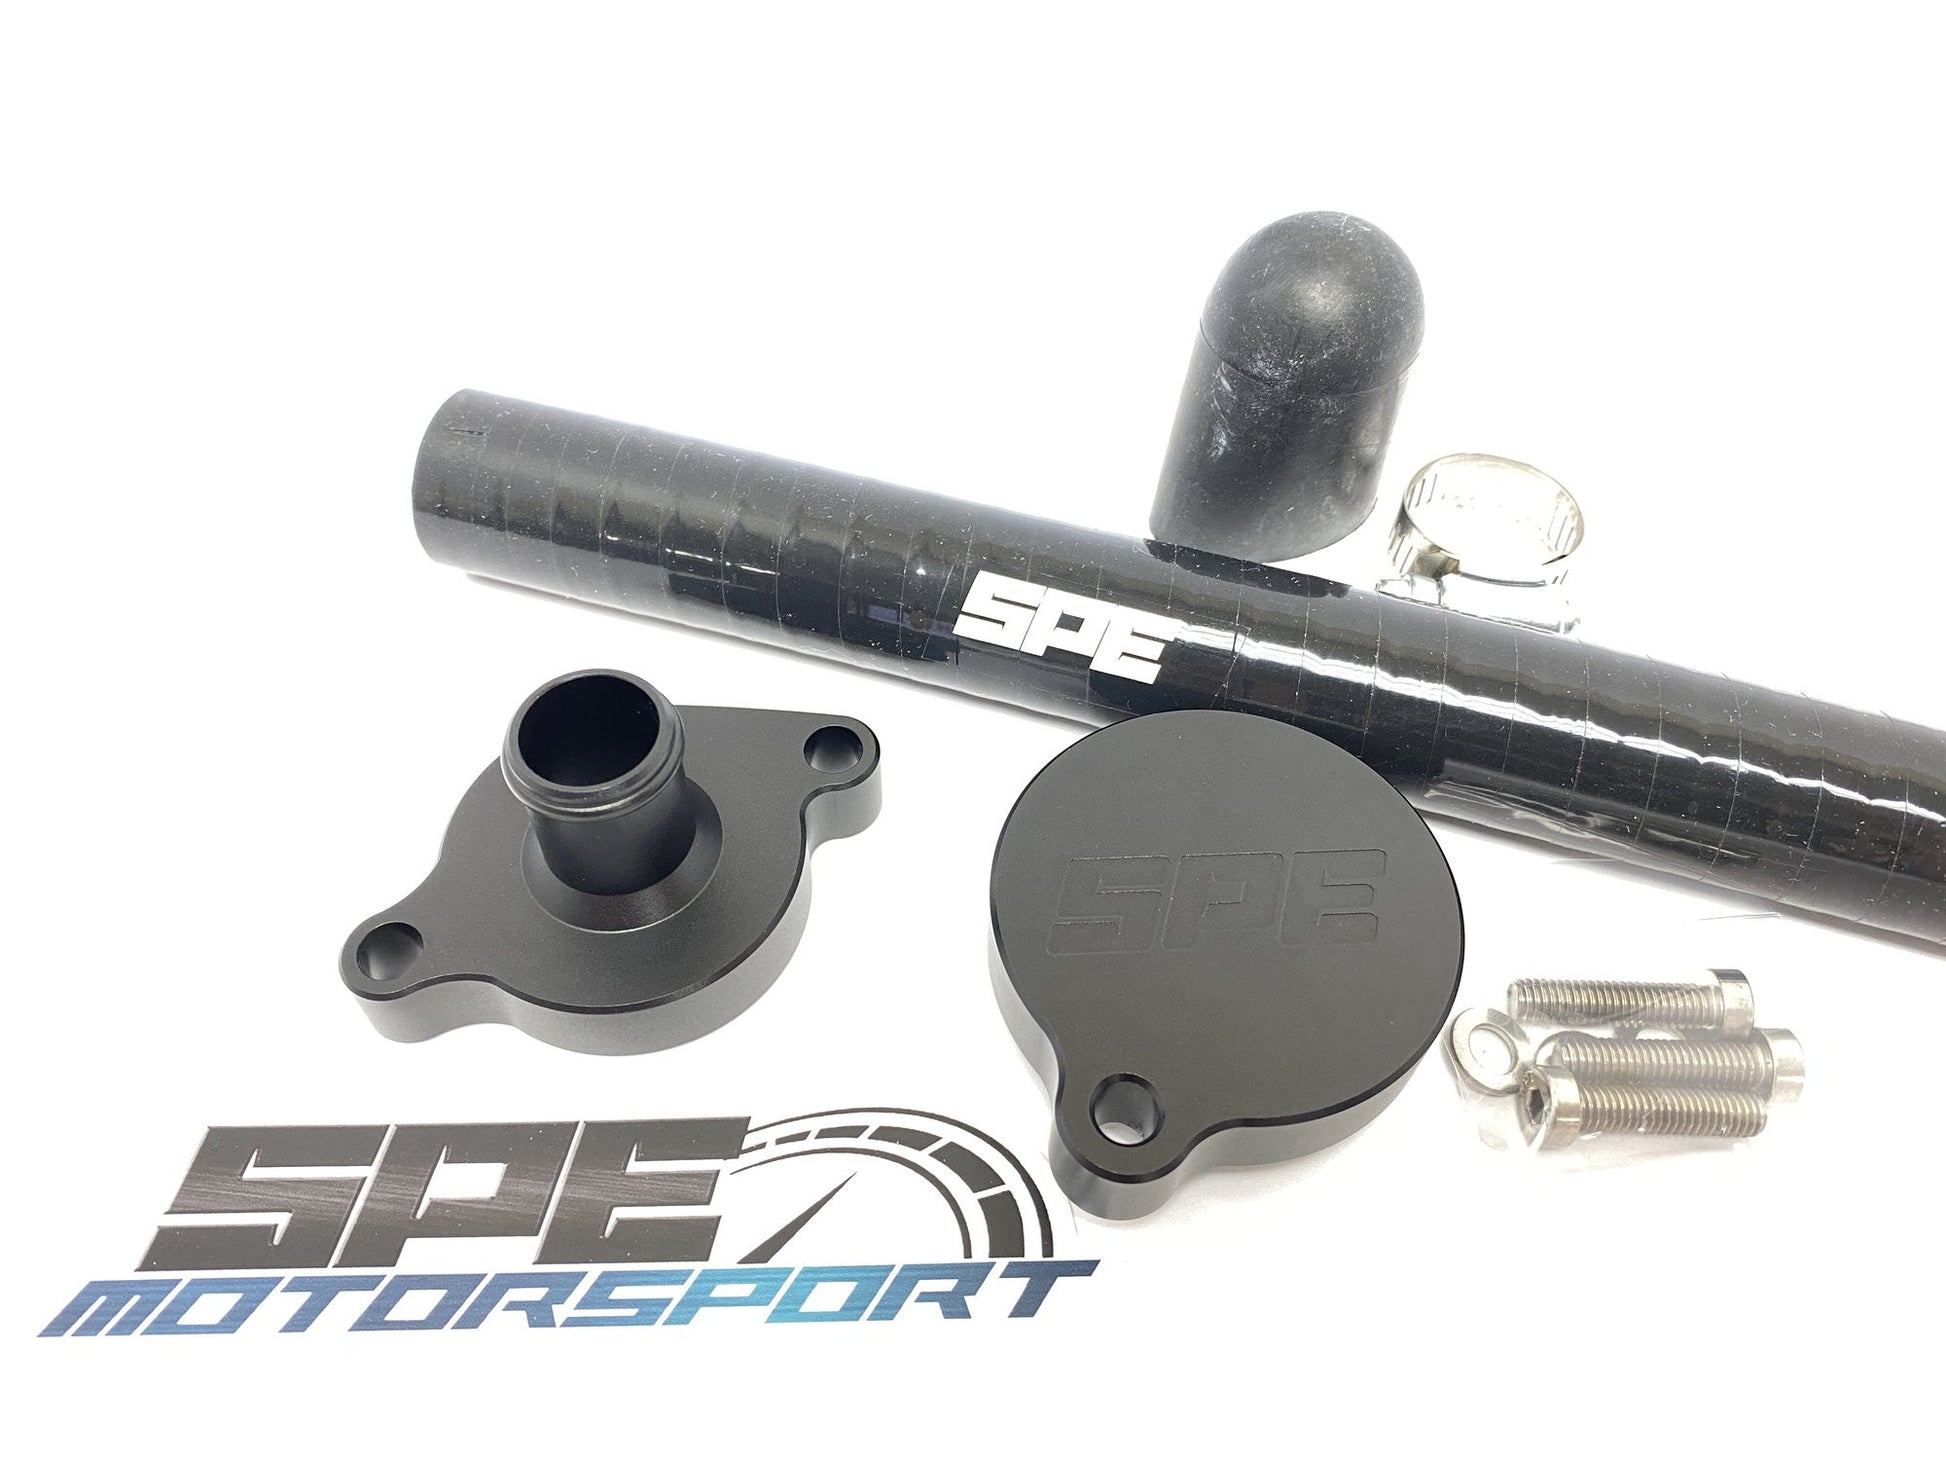 SPE CCV REROUTE KIT - Performance Add-On - Snyder Performance Engineering (SPE) - Texas Complete Truck Center